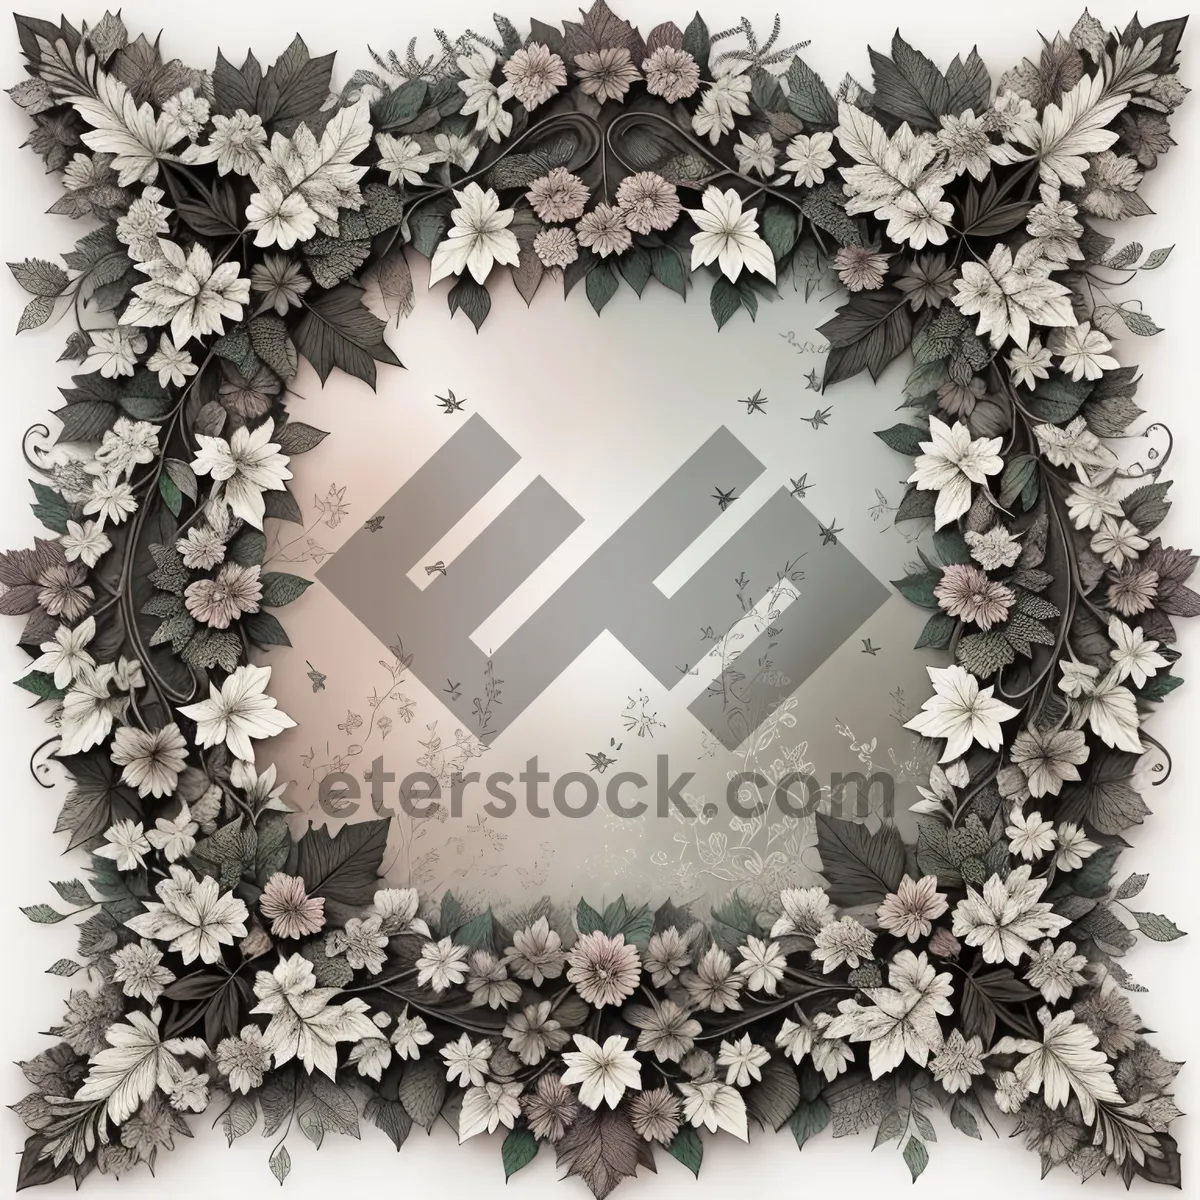 Picture of Festive Holly Frame with Snowflakes and Ornaments